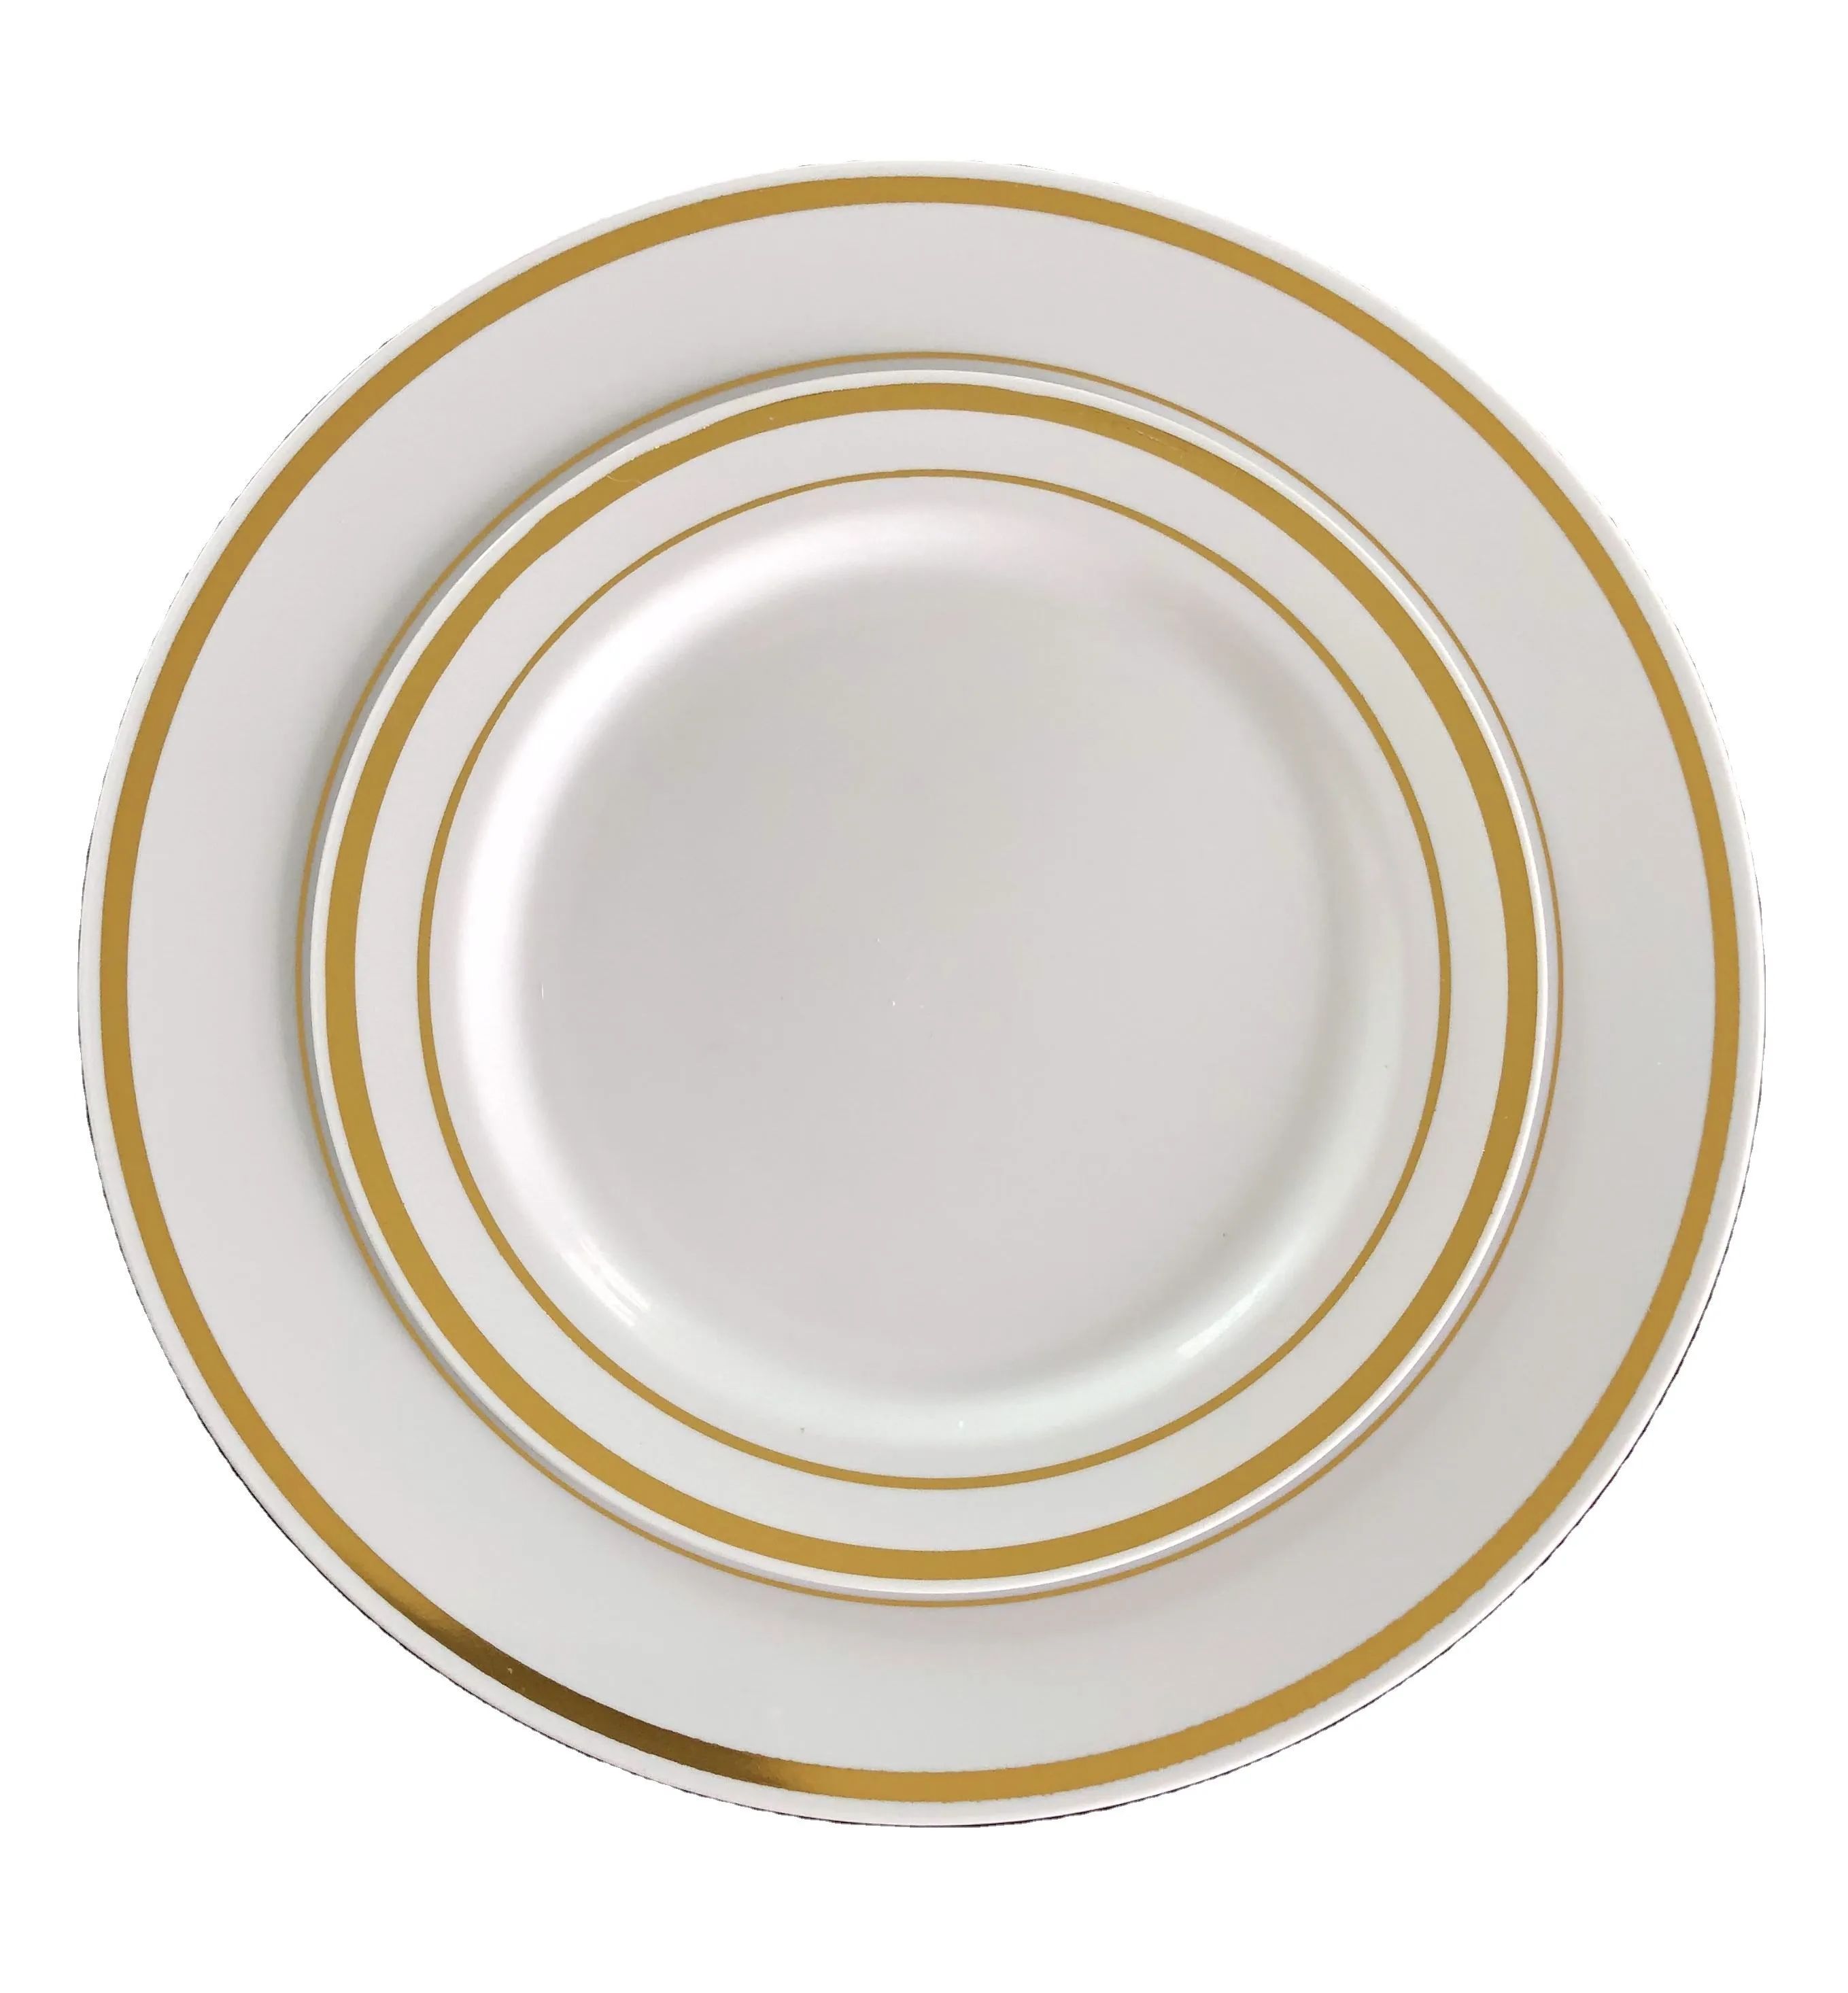  Buy French arcopal dishes types + price